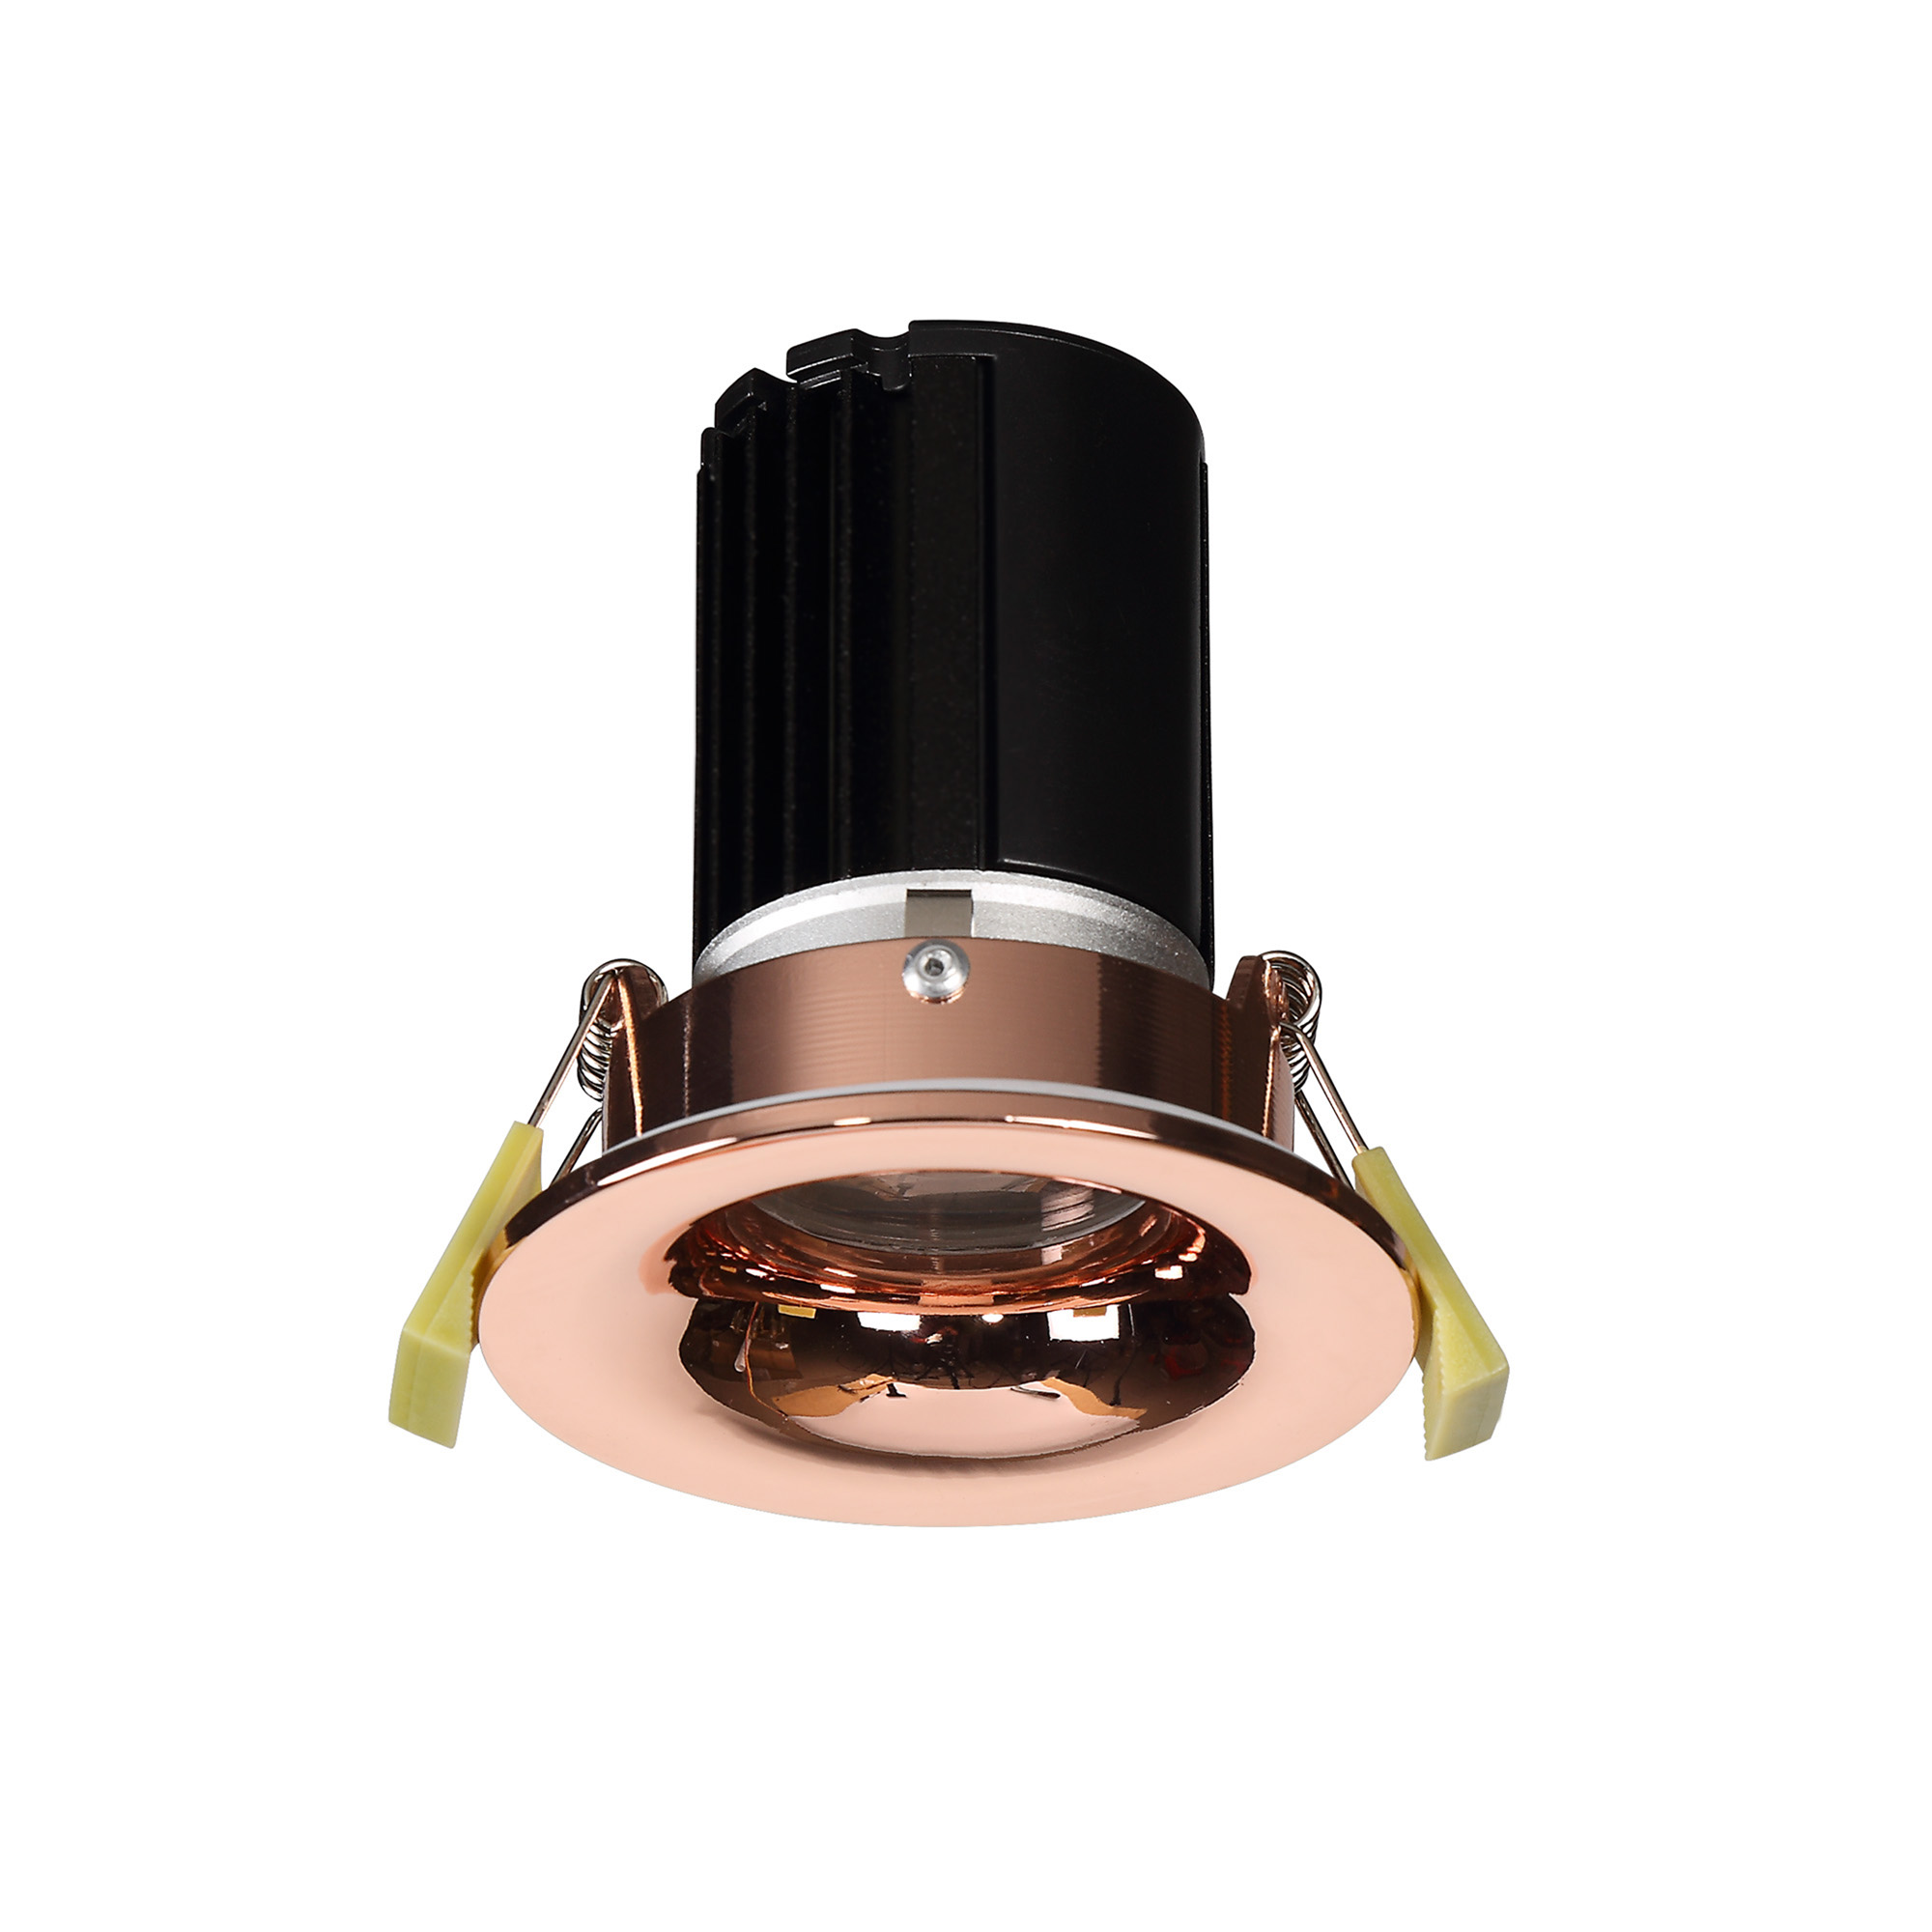 DM200808  Bruve 10 Tridonic powered 10W 2700K 750lm 12° CRI>90 LED Engine Rose Gold Fixed Round Recessed Downlight, Inner Glass cover, IP65